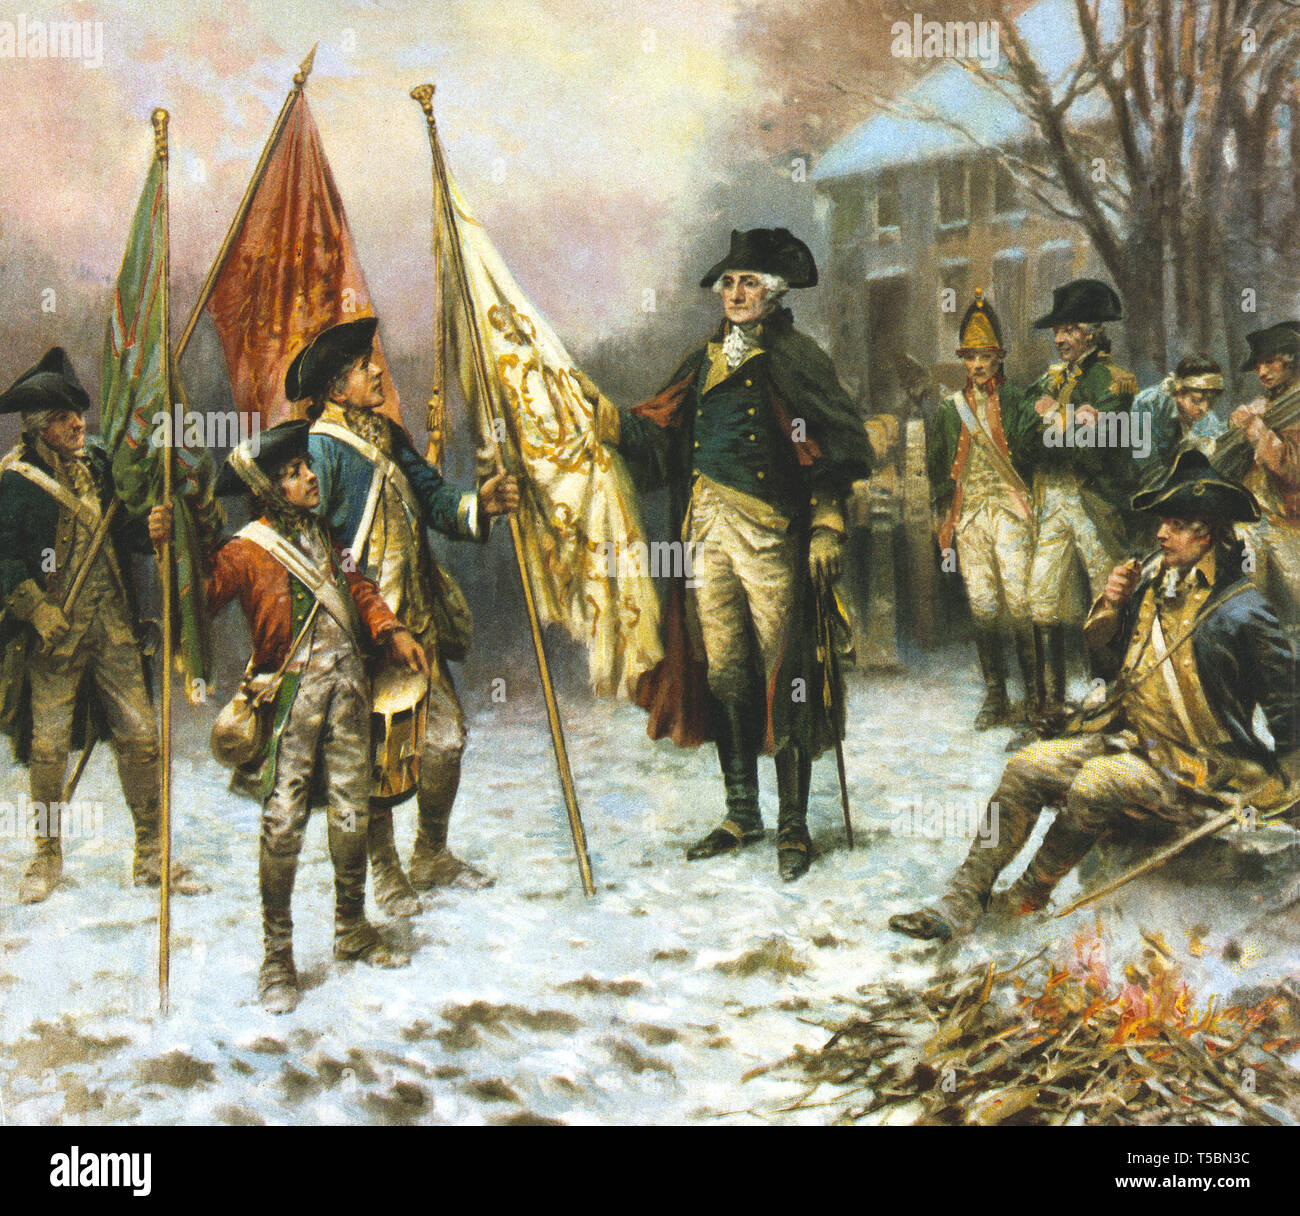 General George Washington Standing with Group of Soldiers Looking at Flags Captured from the British during Battle of Trenton, 1776, Lithograph by Hayes Litho Co from a Painting by Percy Moran, 1914 Stock Photo